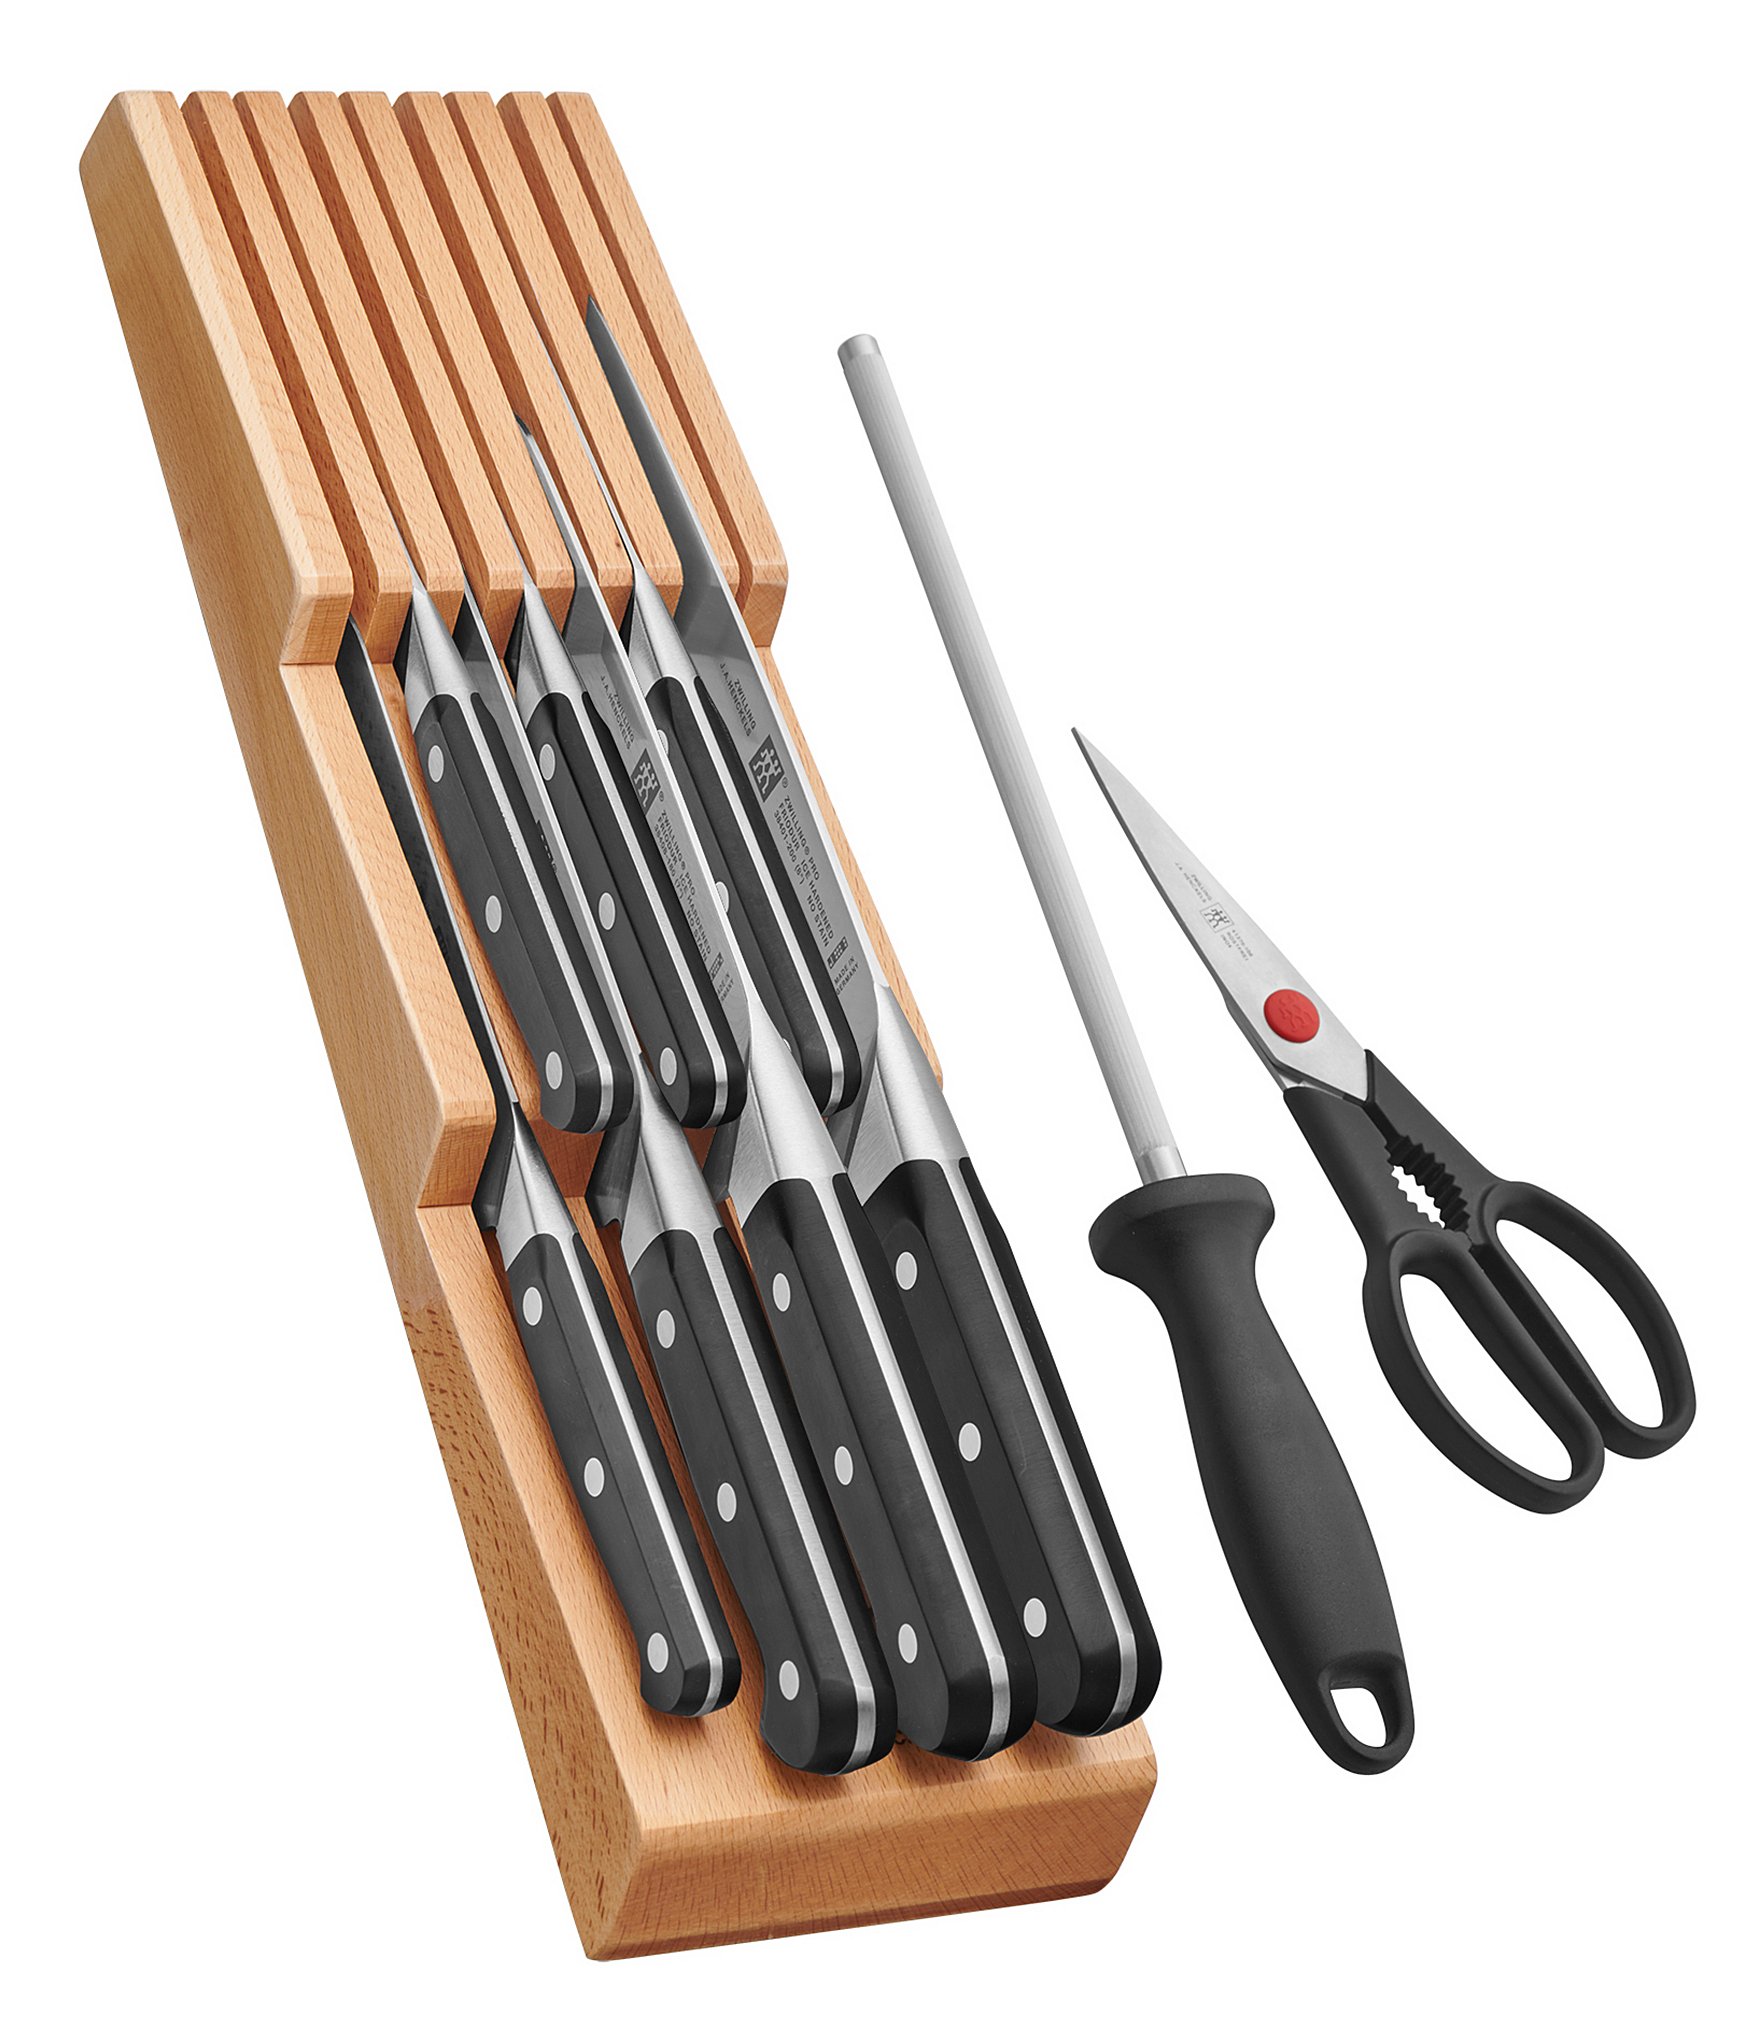 Zwilling J.A. Henckels Pro 10 Piece Knife Block Set with InDrawer